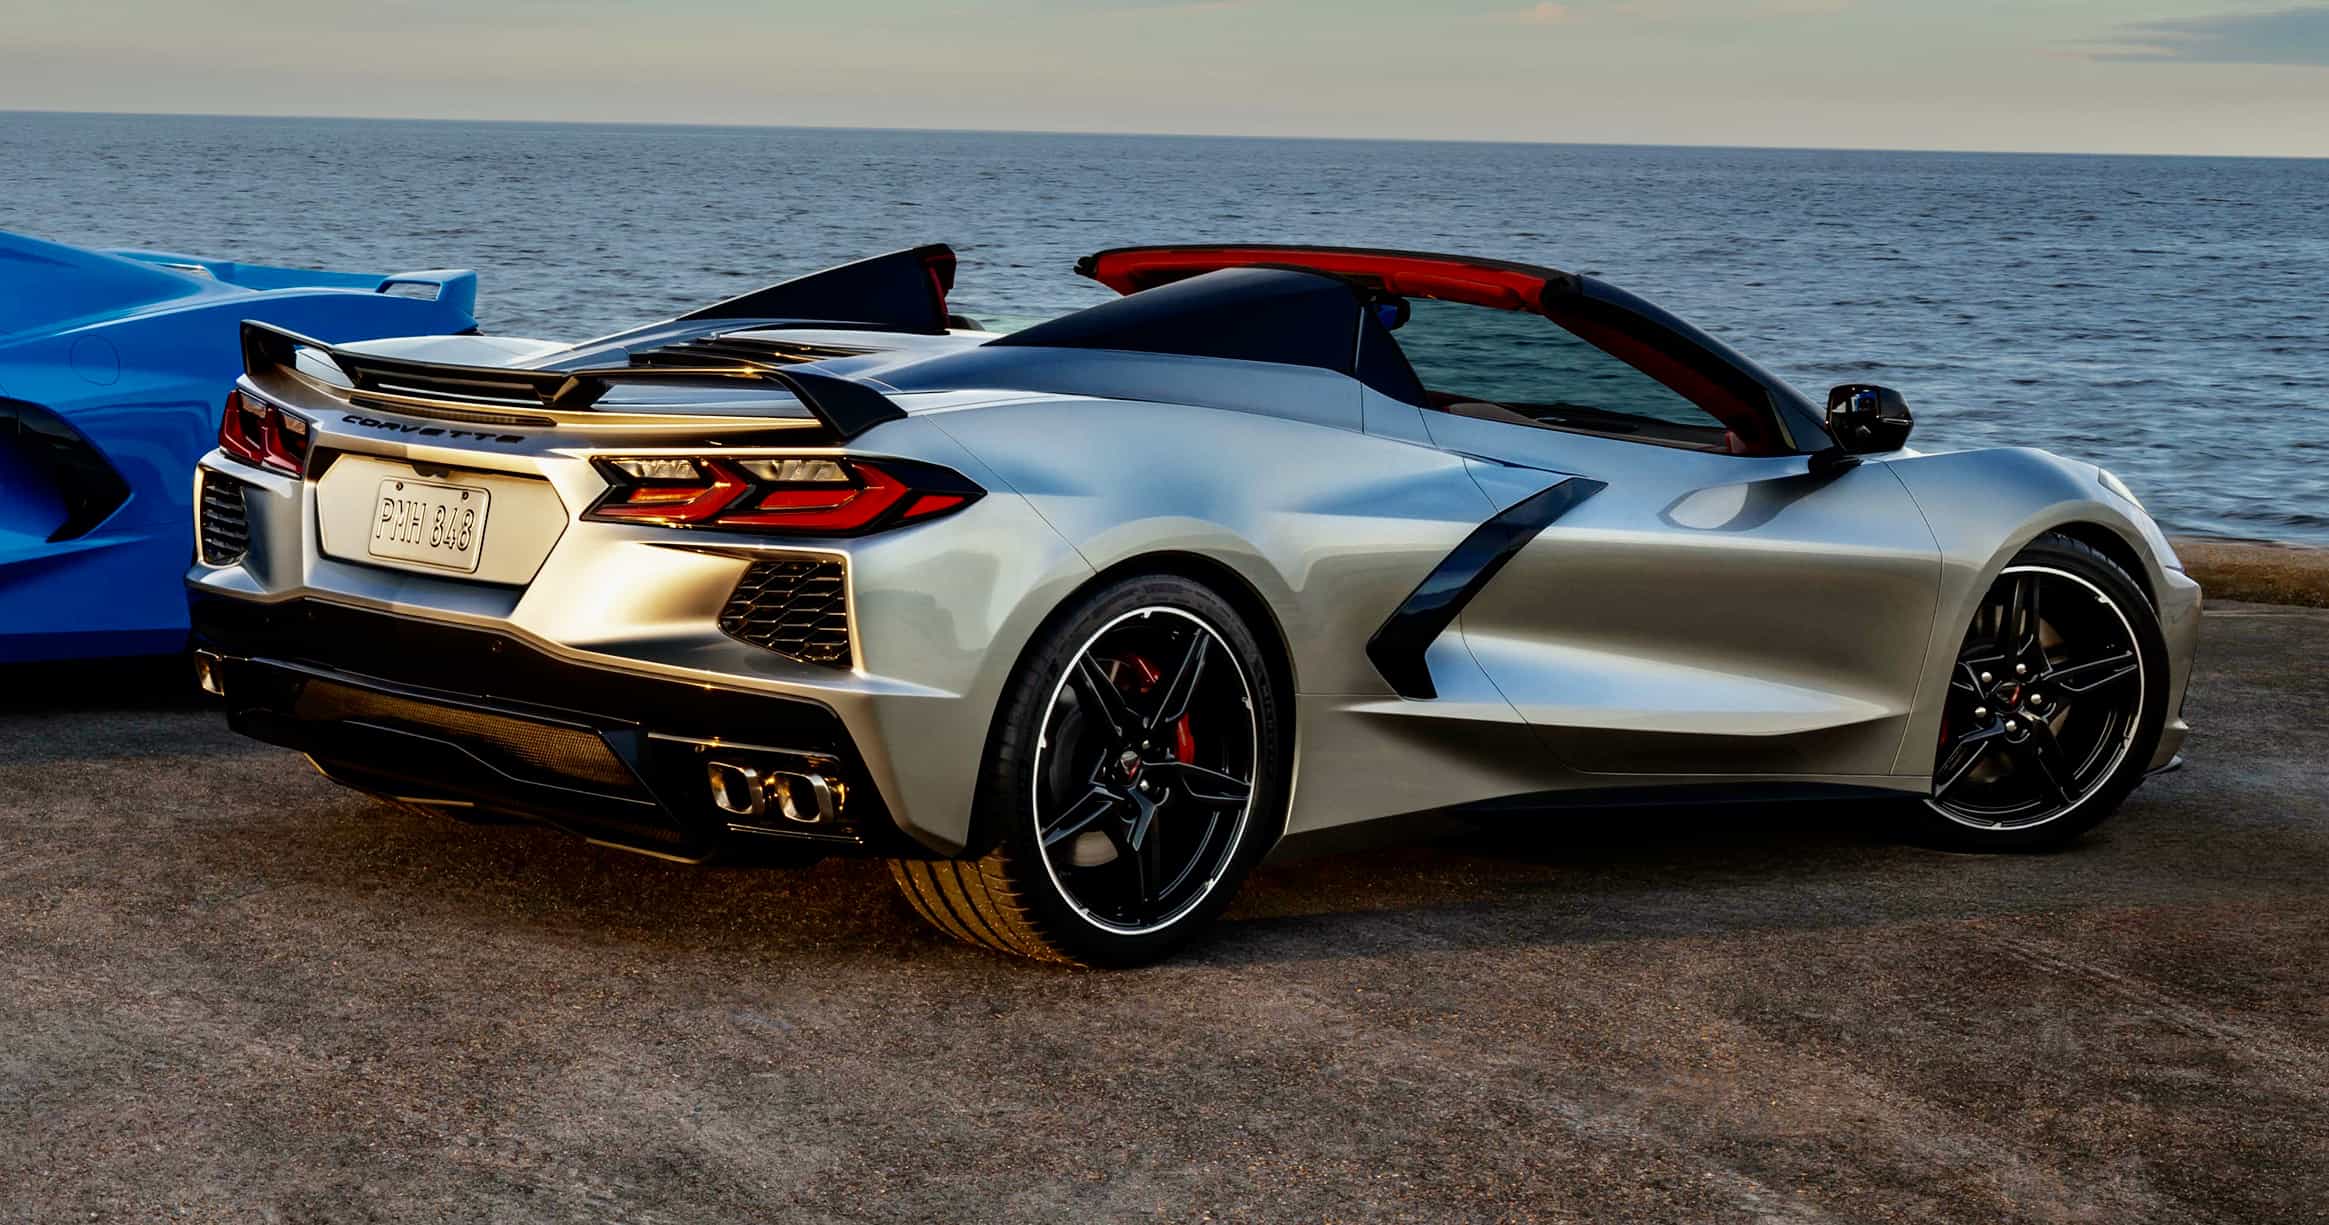 Chevy will hold pricing of 2021 C8 Corvette at ’20 figures